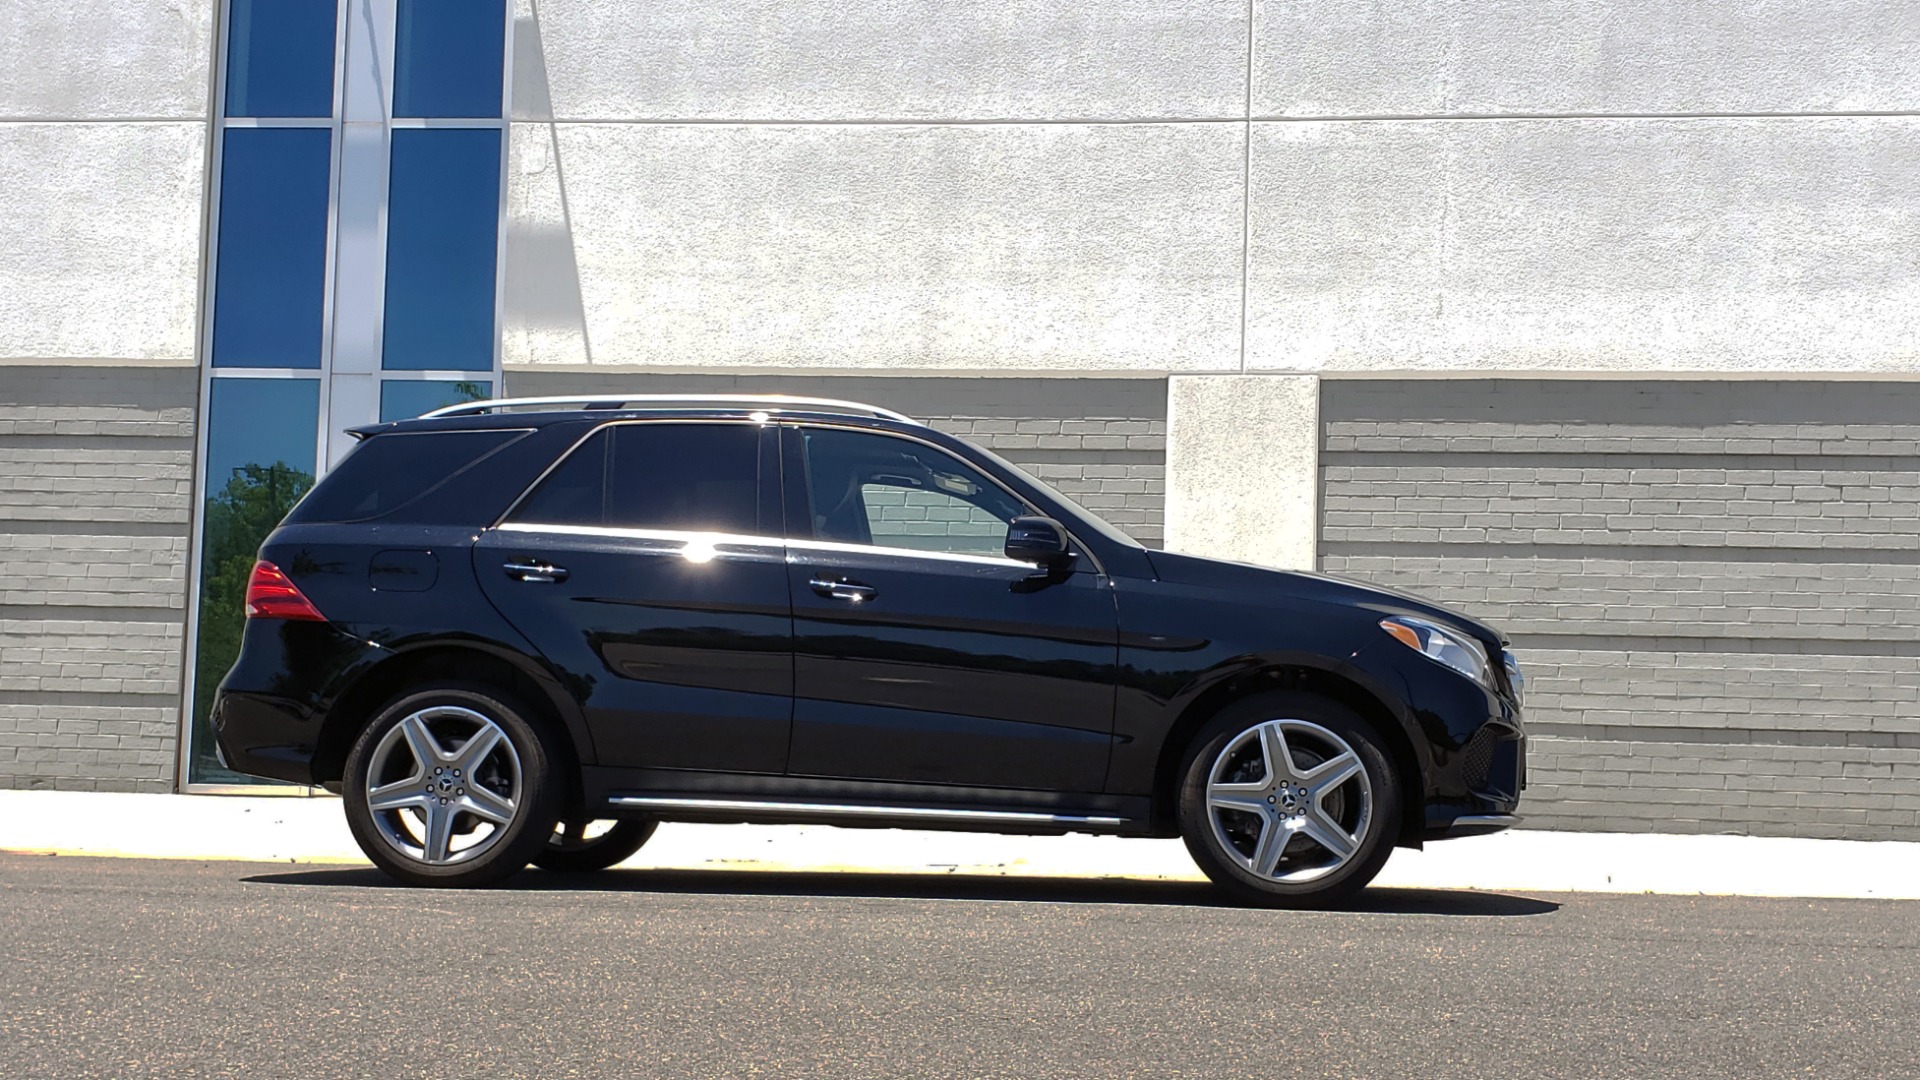 Used 2018 Mercedes-Benz GLE 350 4MATIC PREMIUM / NAV / AMG LINE INT / H/K SND / SUNROOF / REARVIEW for sale Sold at Formula Imports in Charlotte NC 28227 9